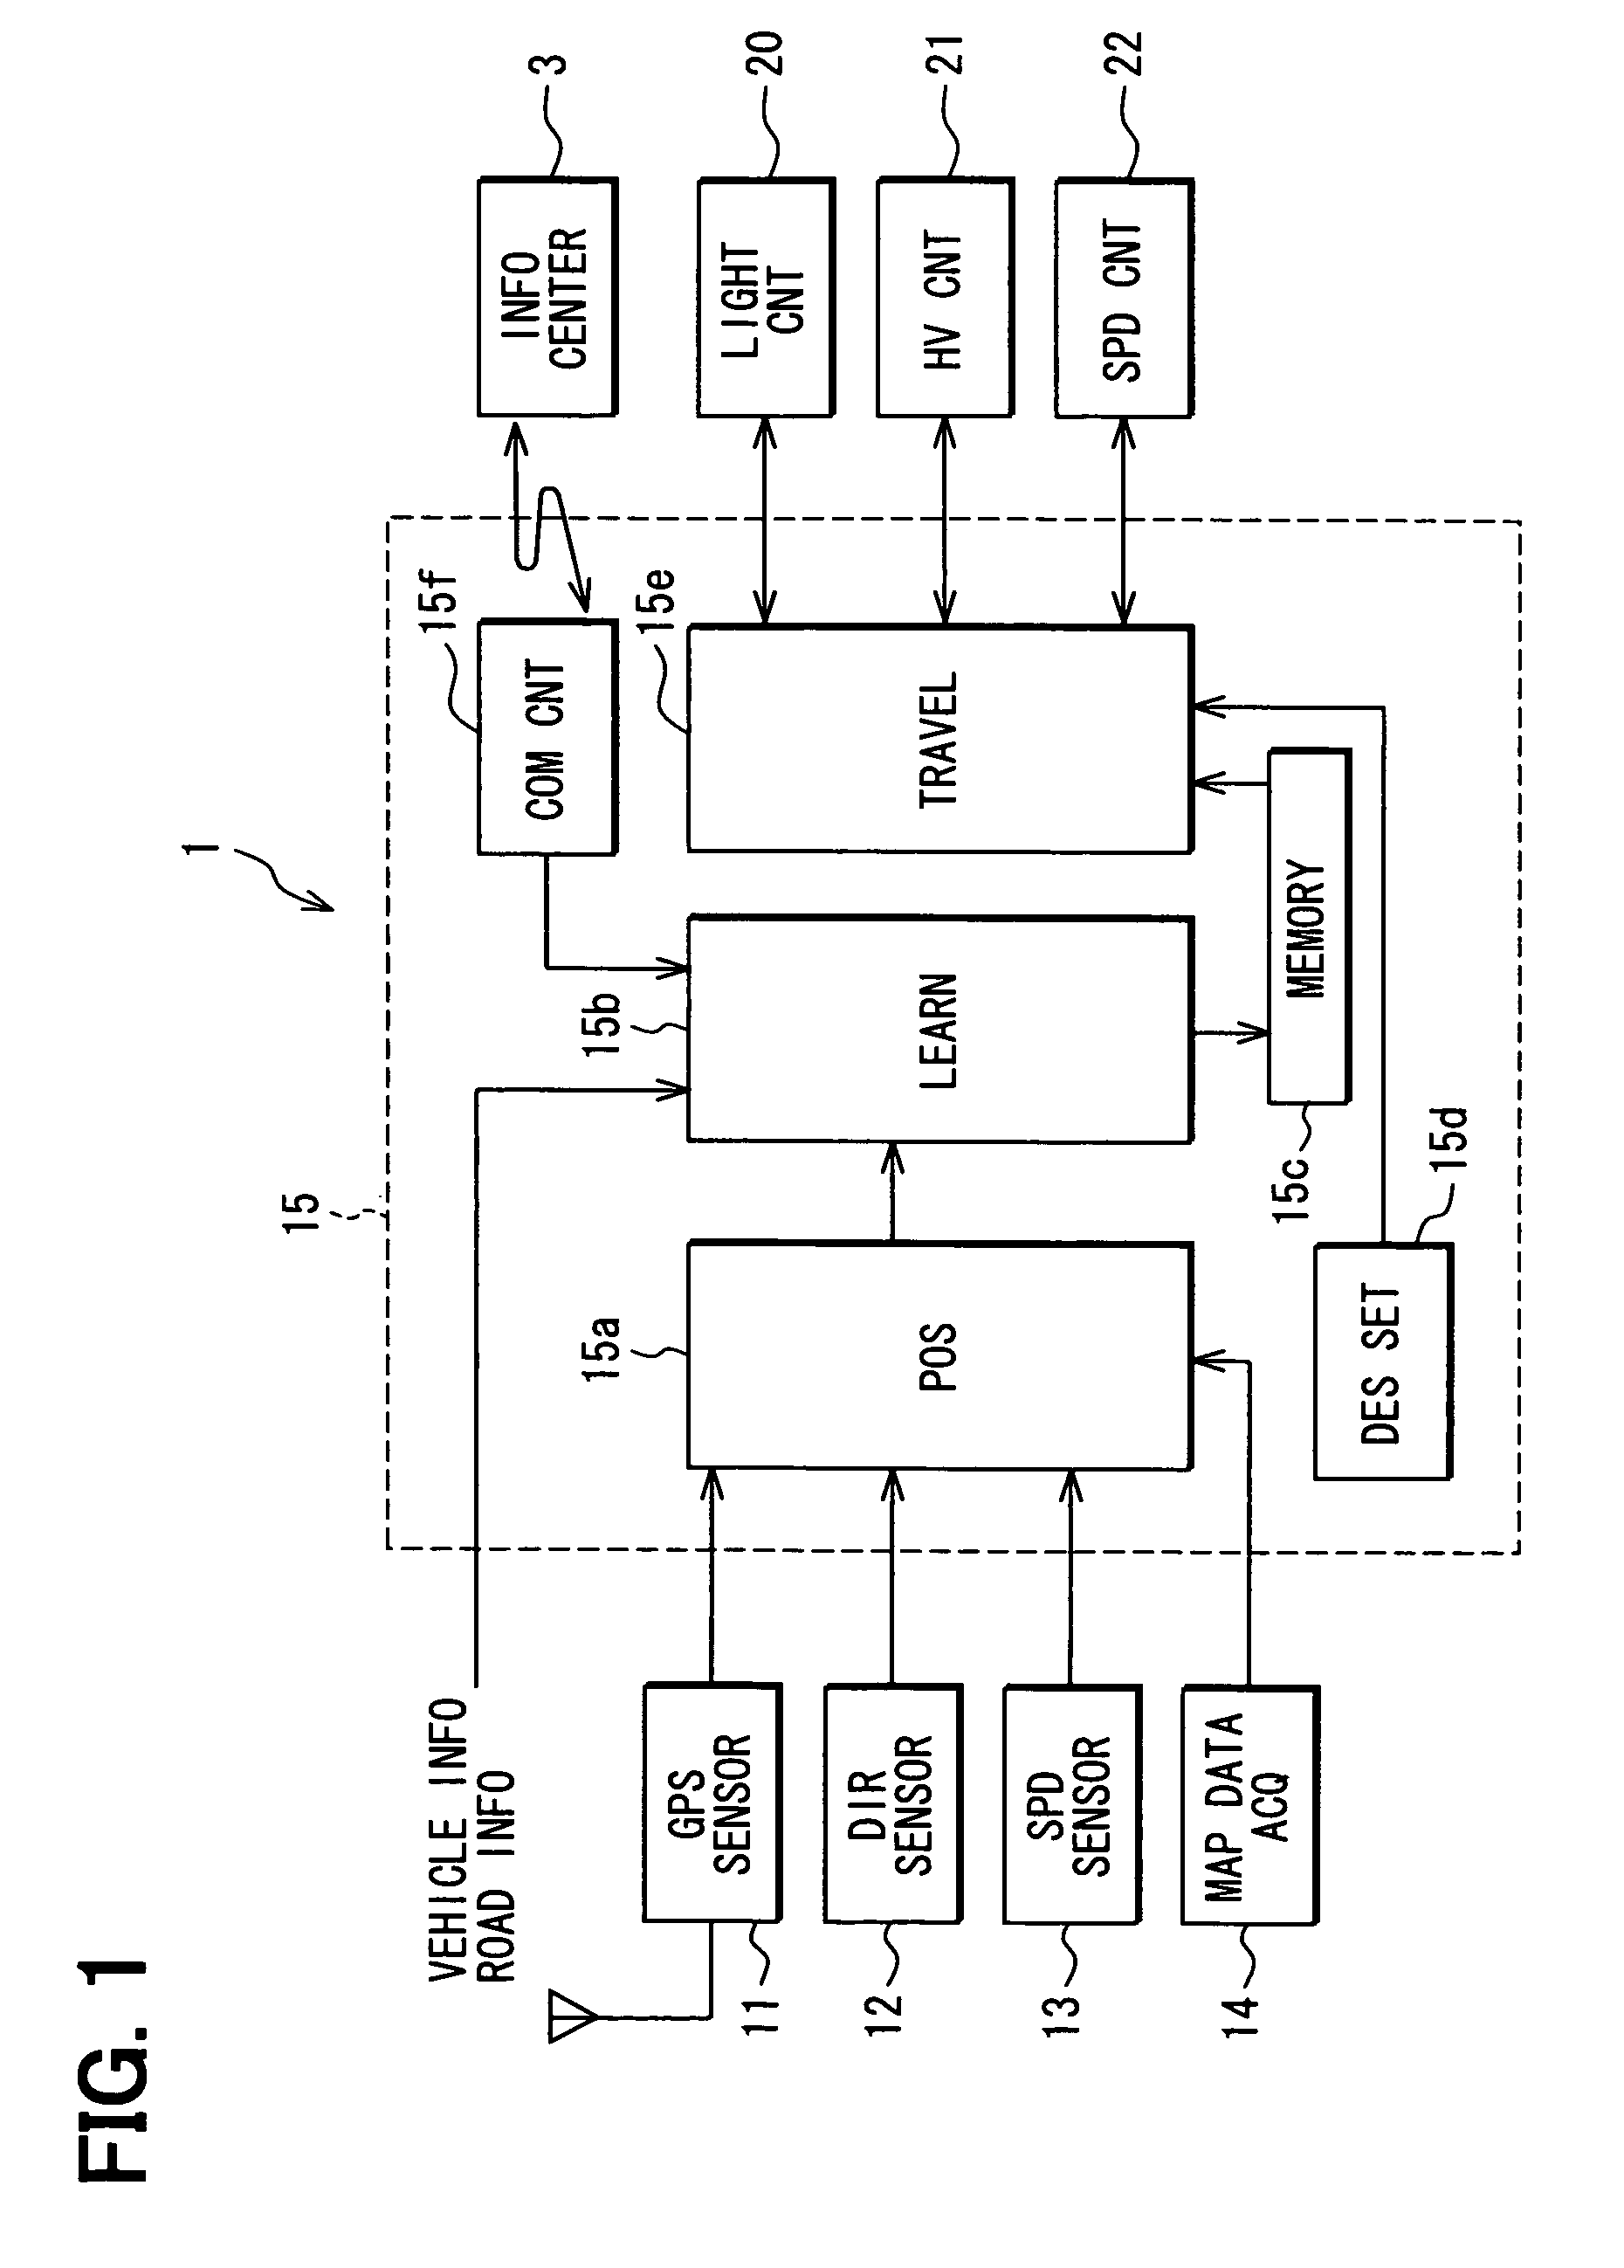 Travel information collection apparatus